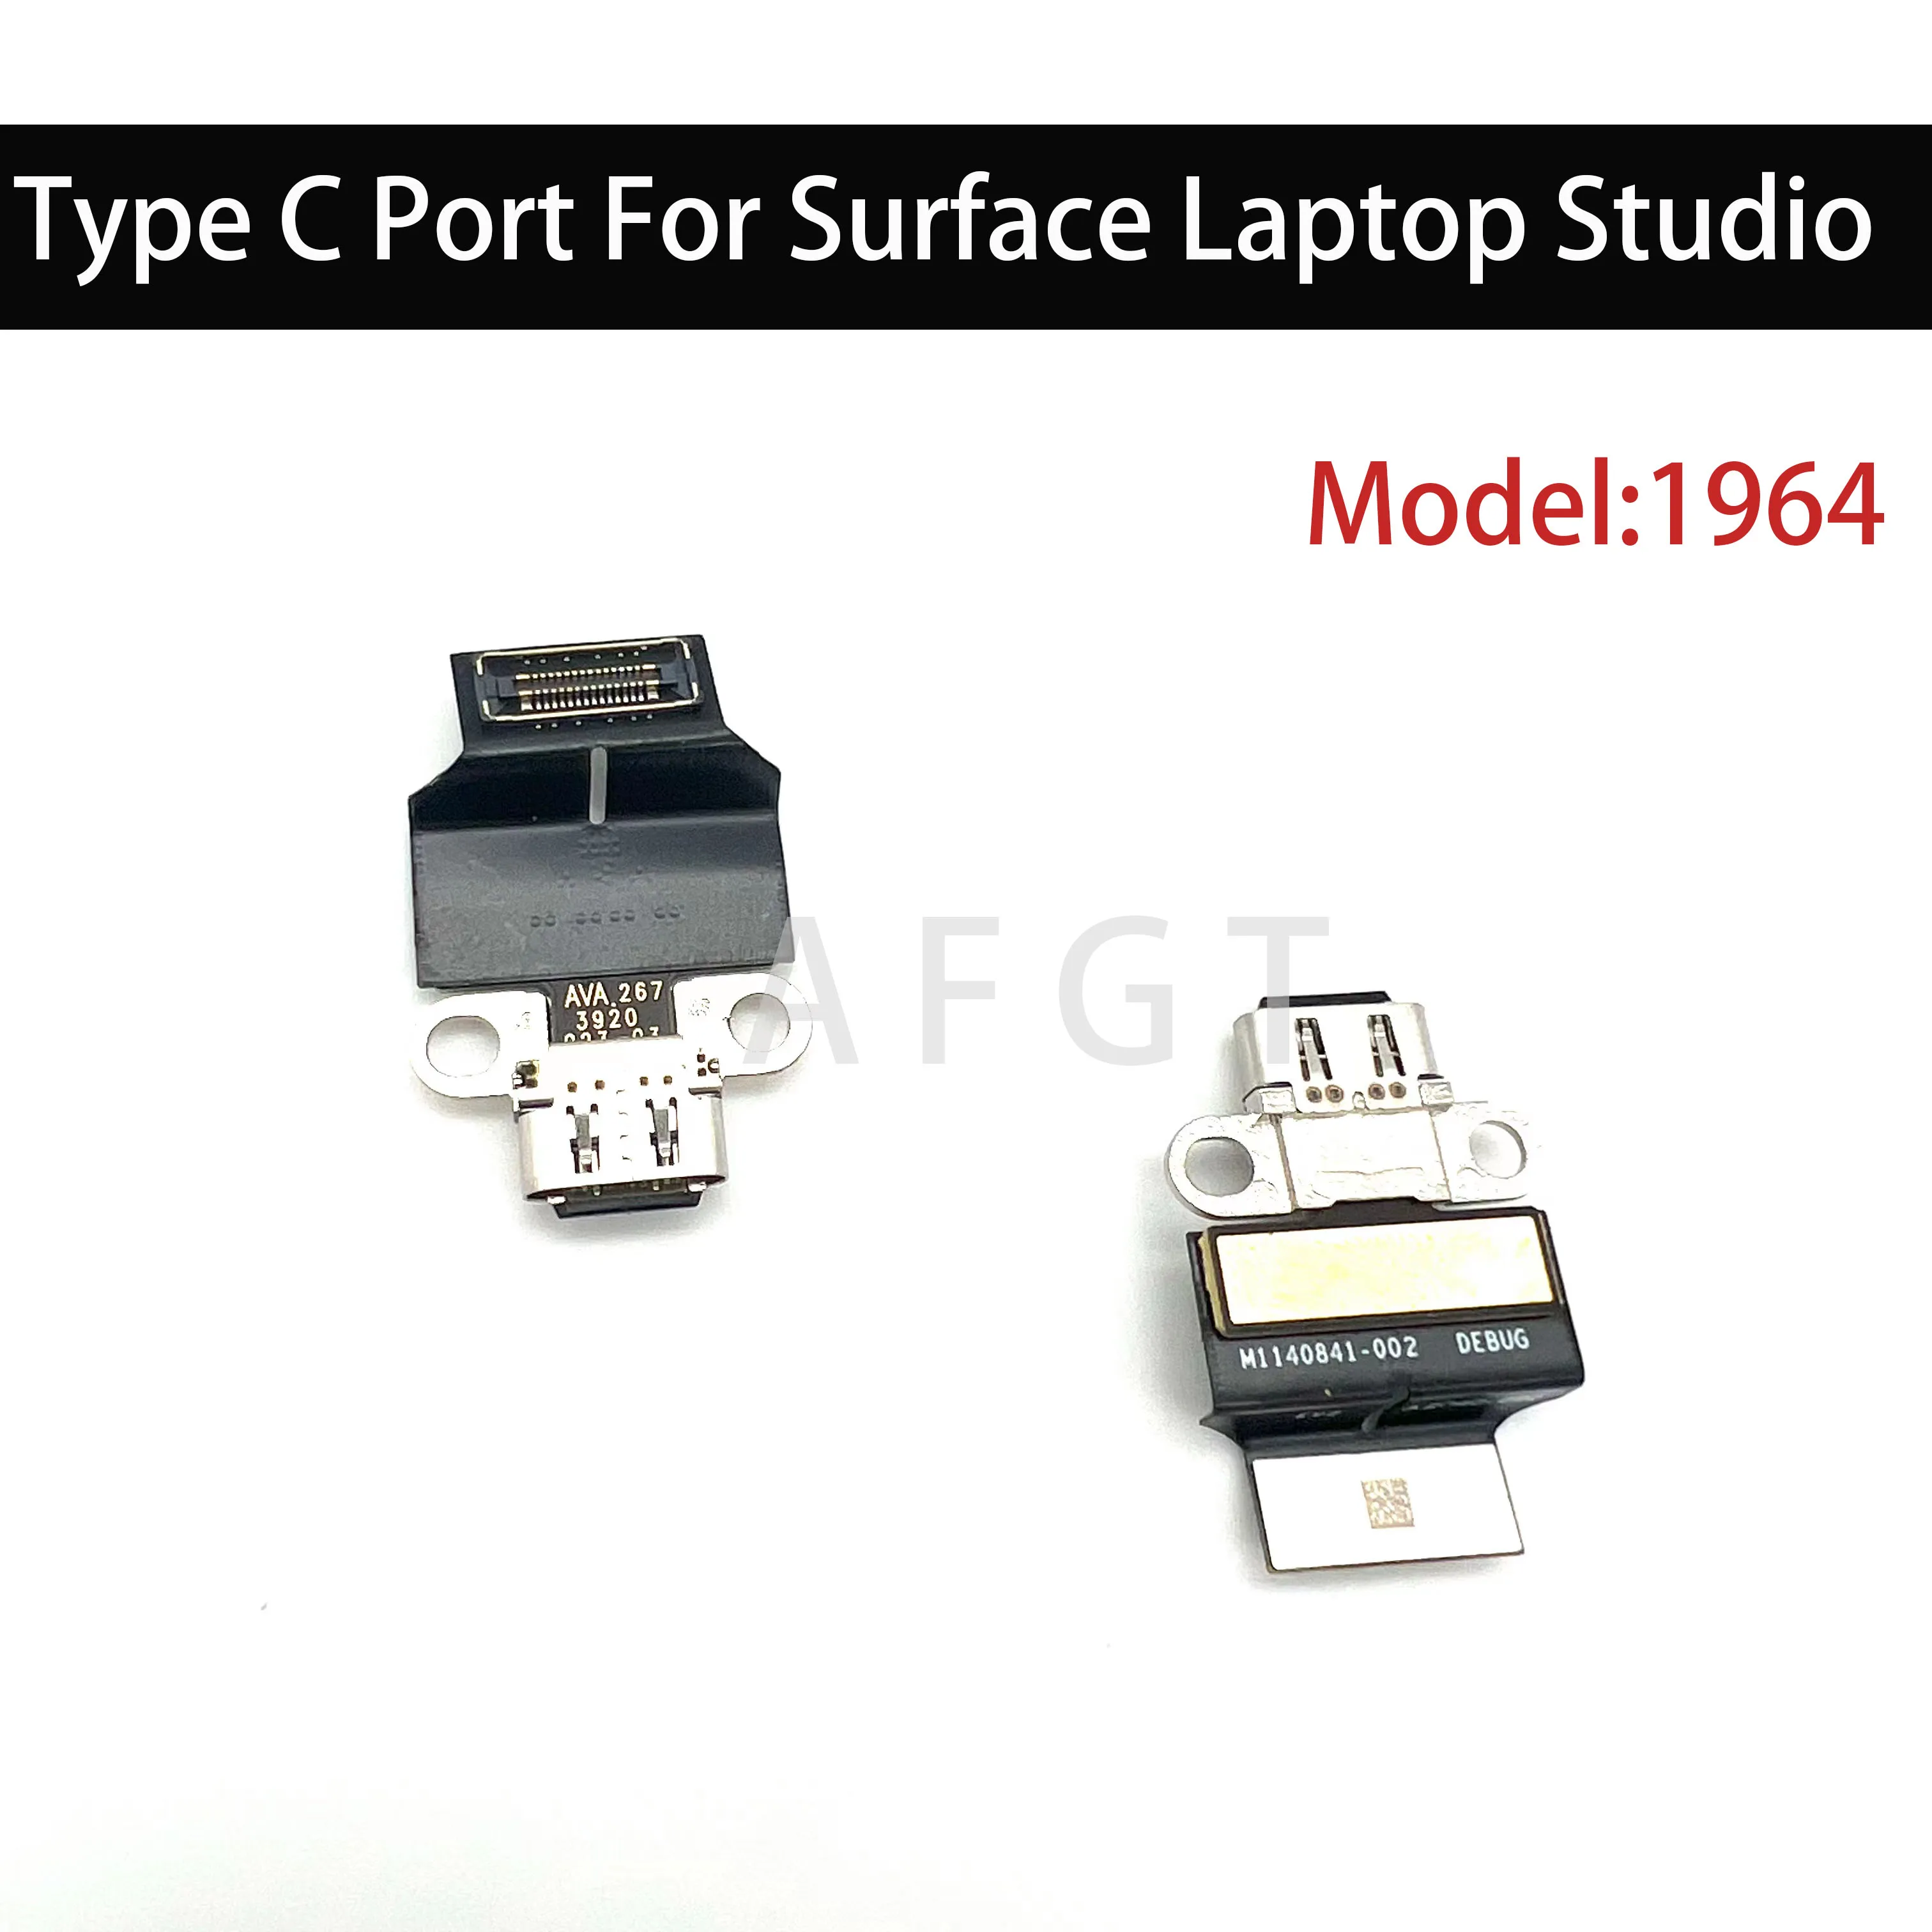 

Original Type C Port For Microsoft Surface Laptop Studio 1964 Charge Port Replacement Tested Well M1140841-002